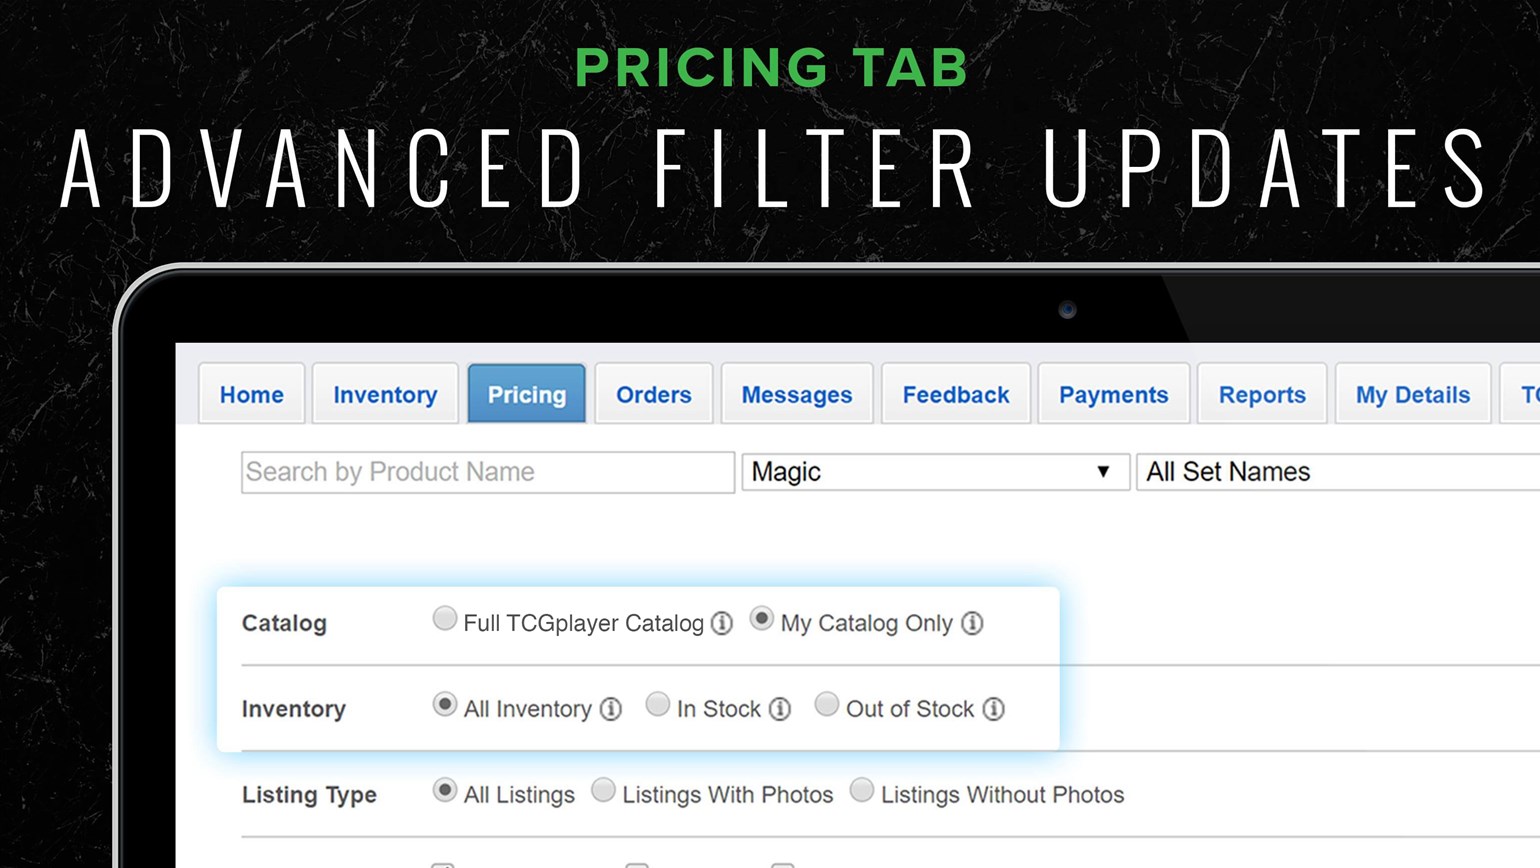 Manage Inventory More Effectively with Updated Pricing Tab Filters